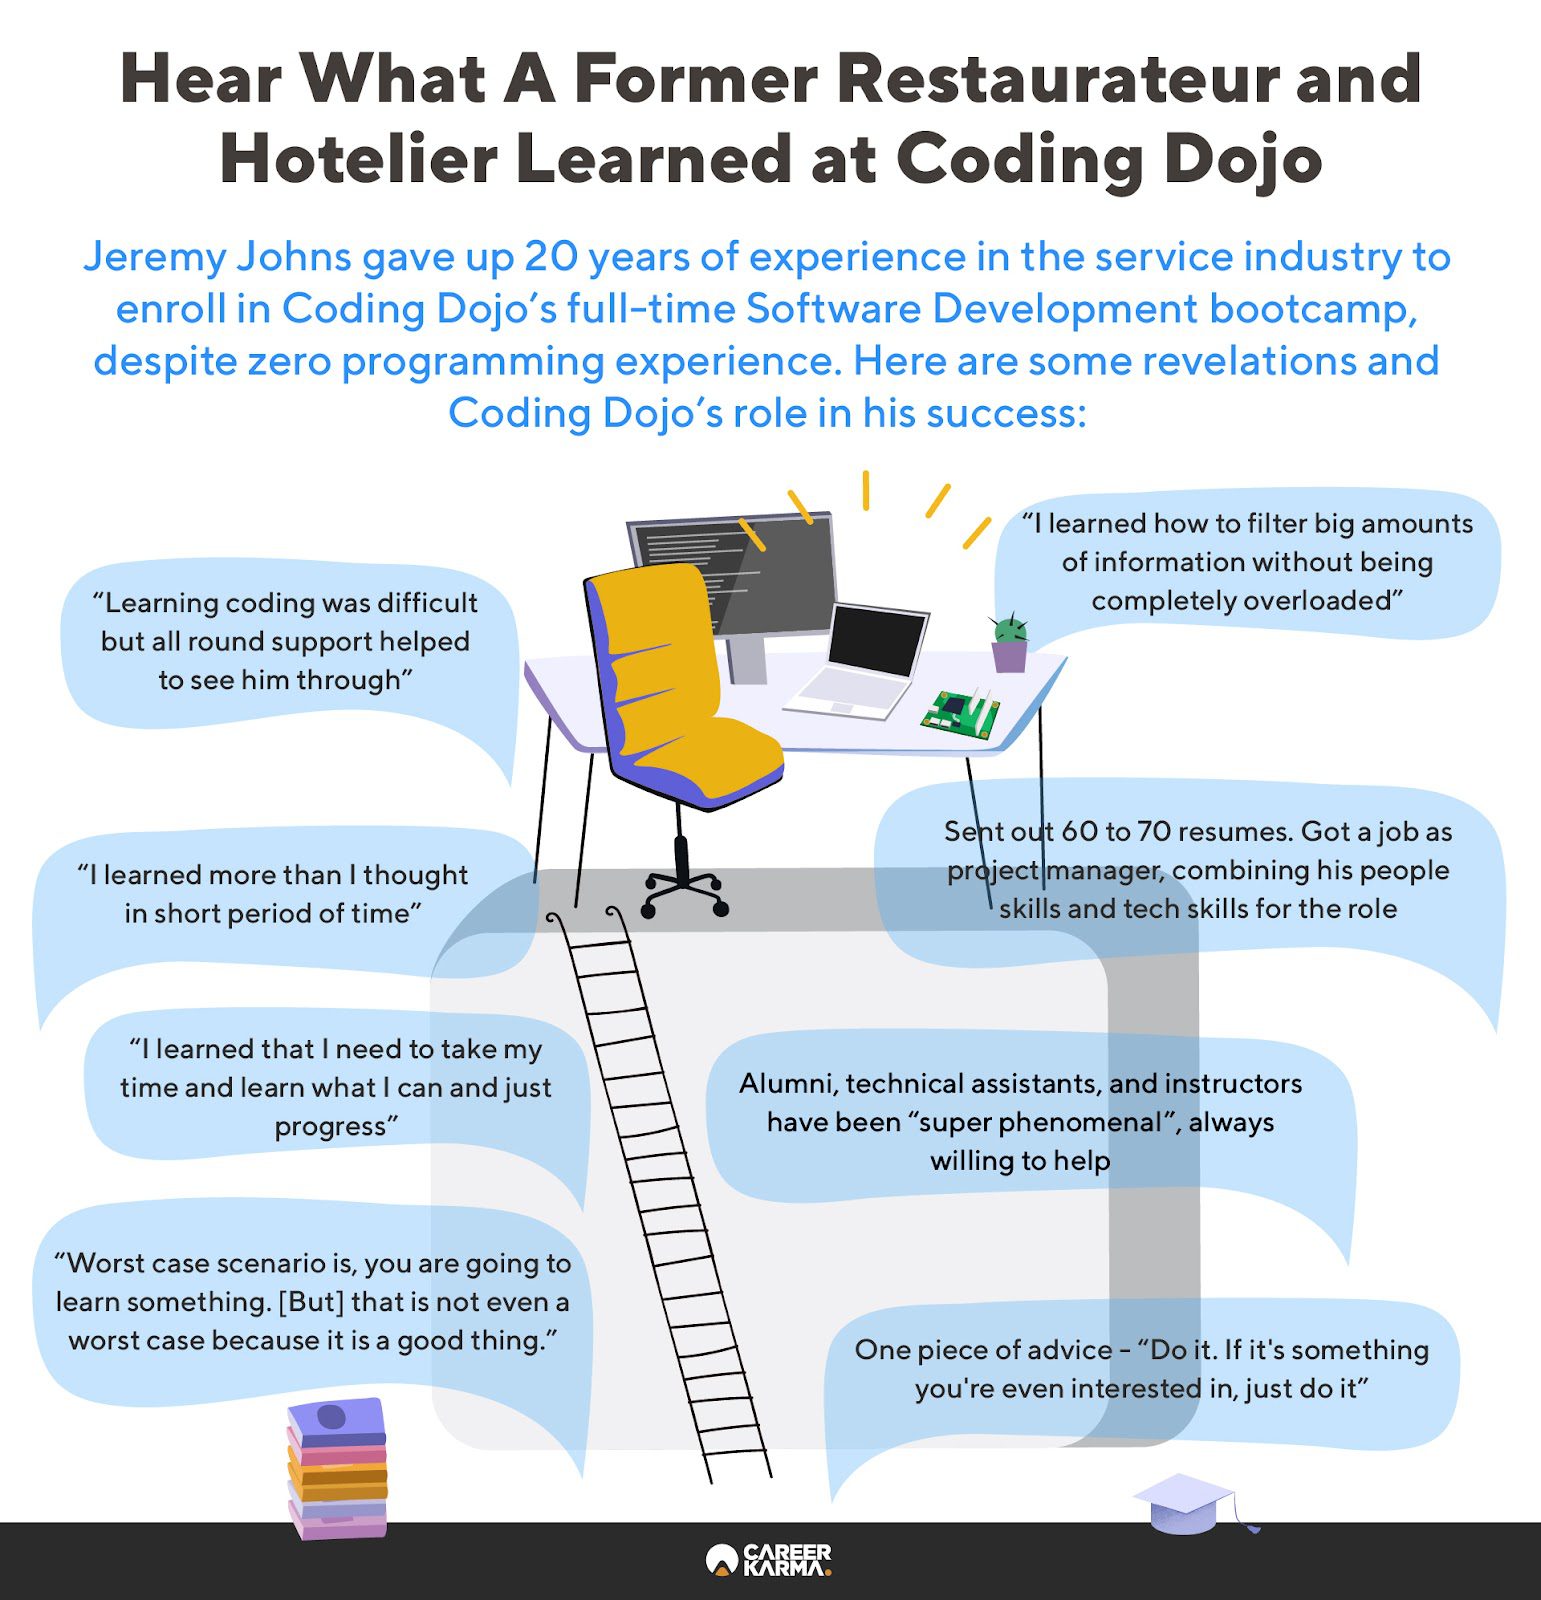 Infographic showing positive reviews that a Coding Dojo graduate had about the coding bootcamp